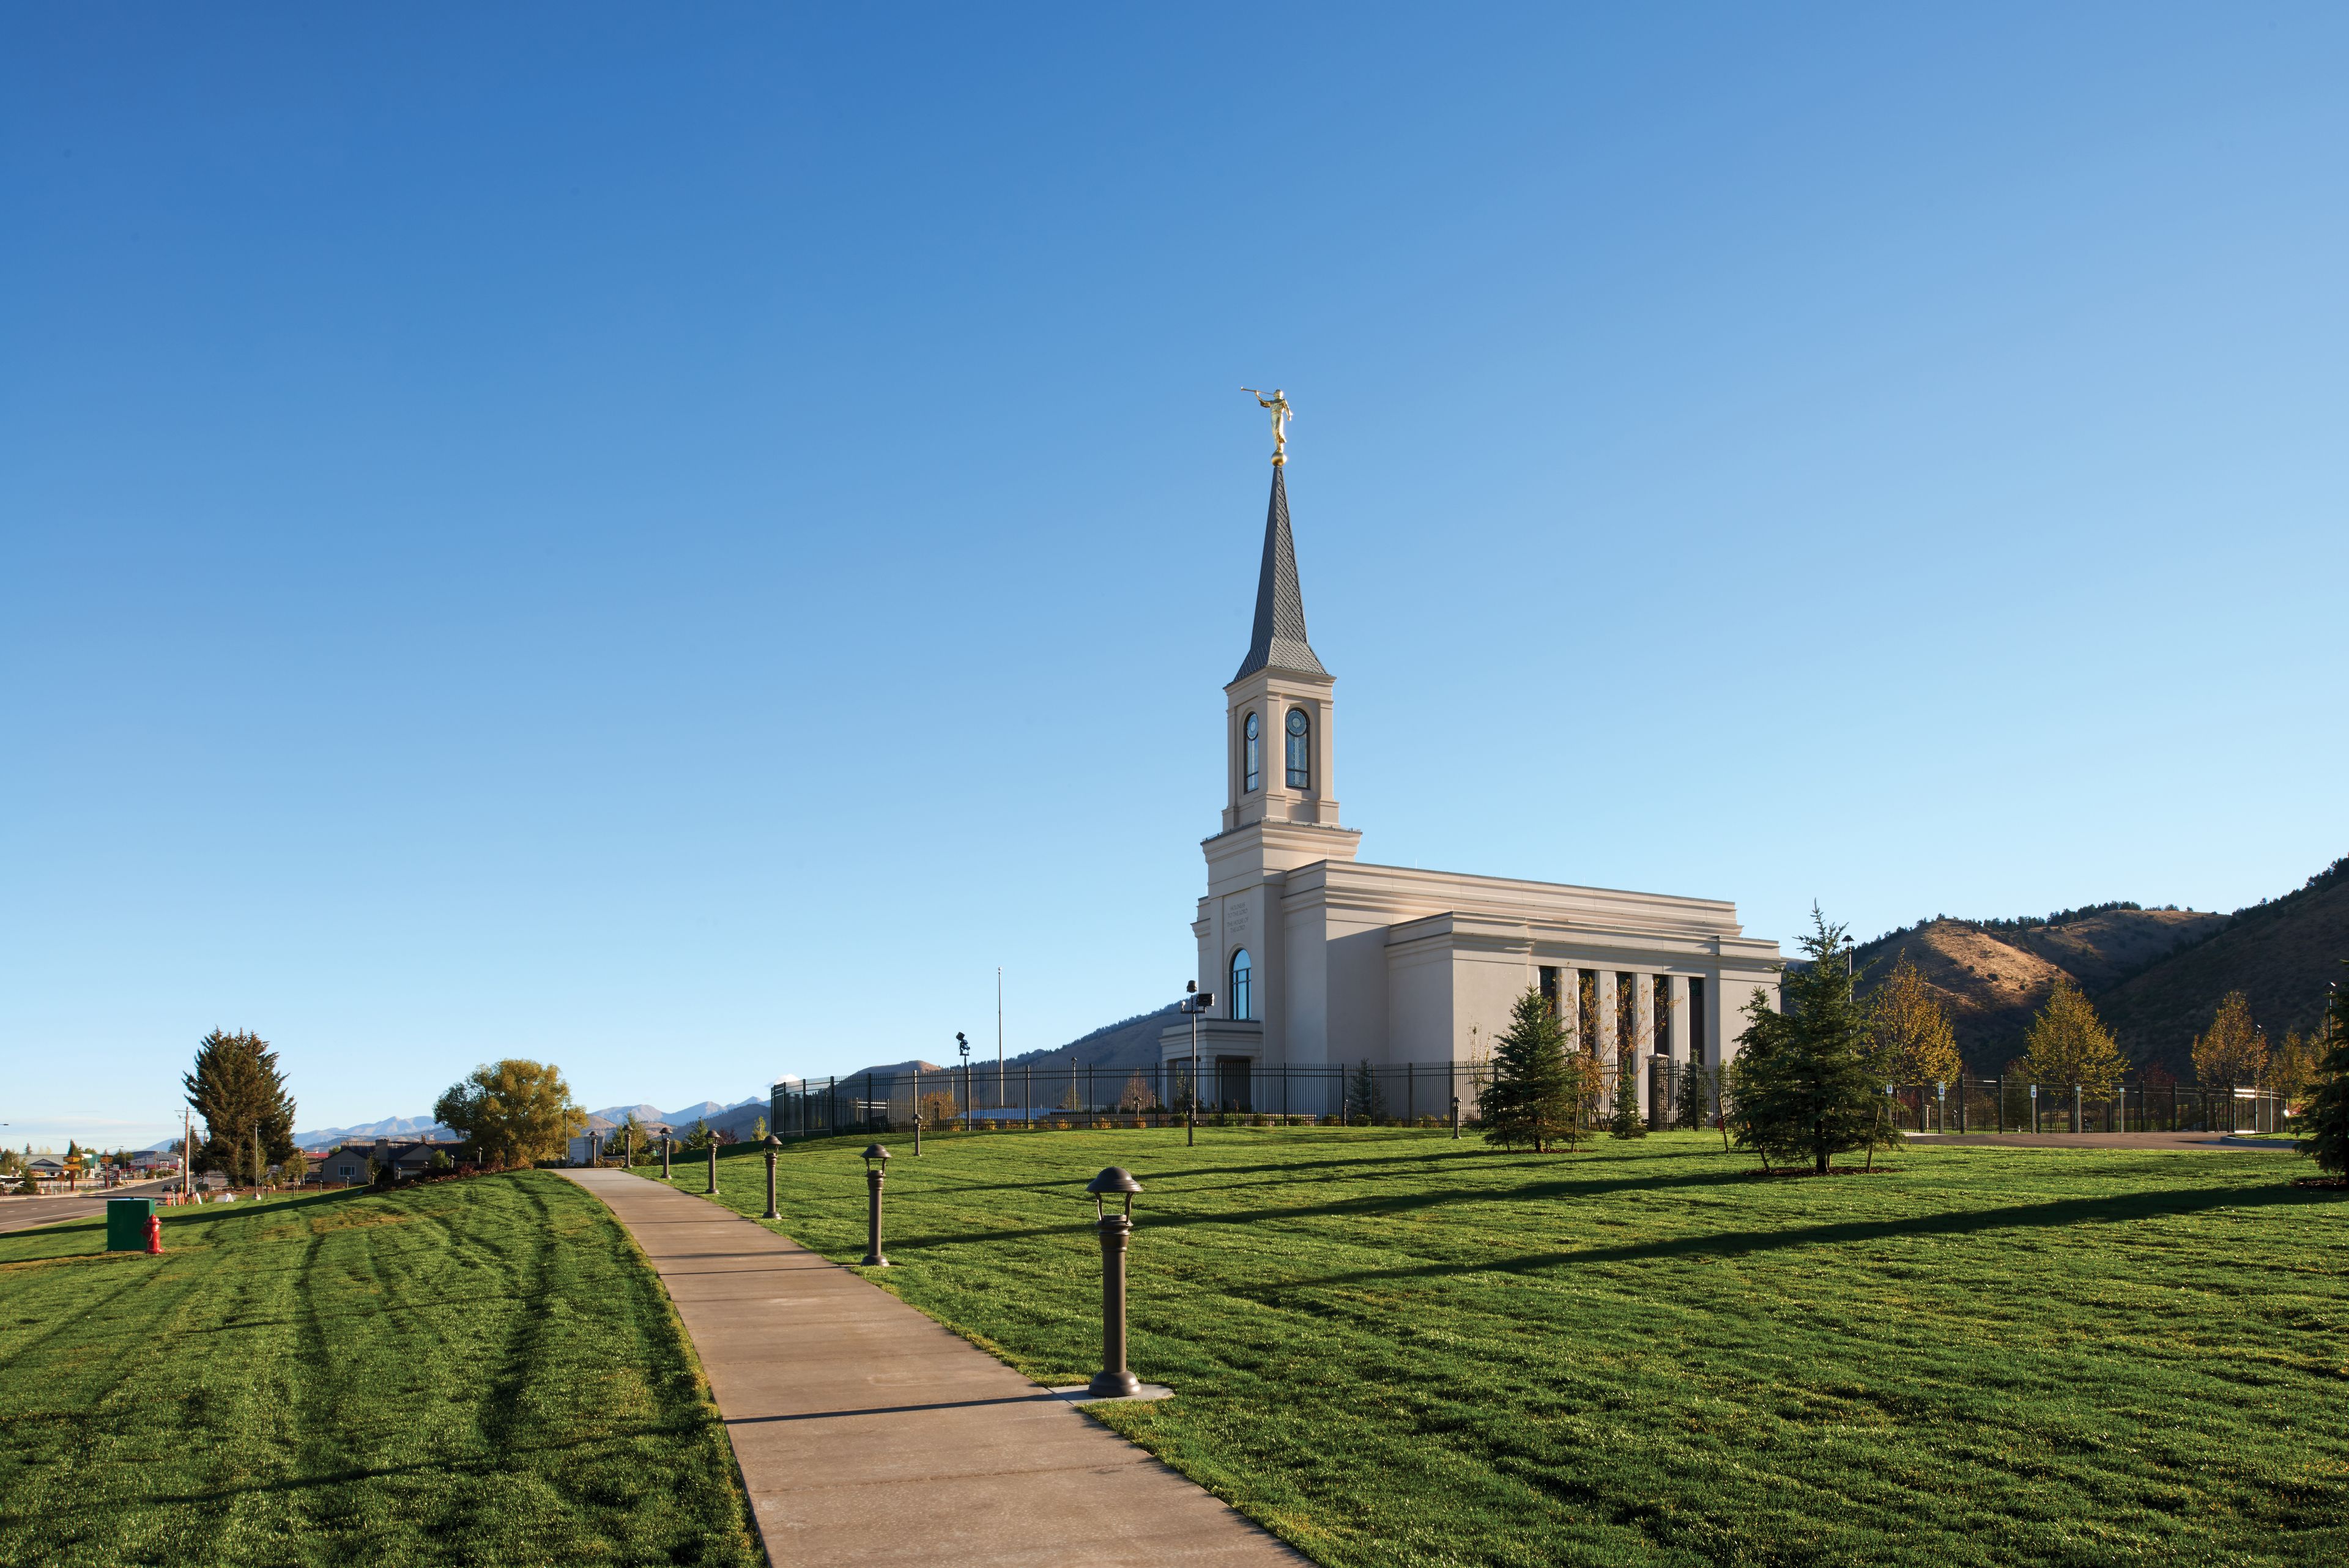 An image of the Star Valley Wyoming Temple.